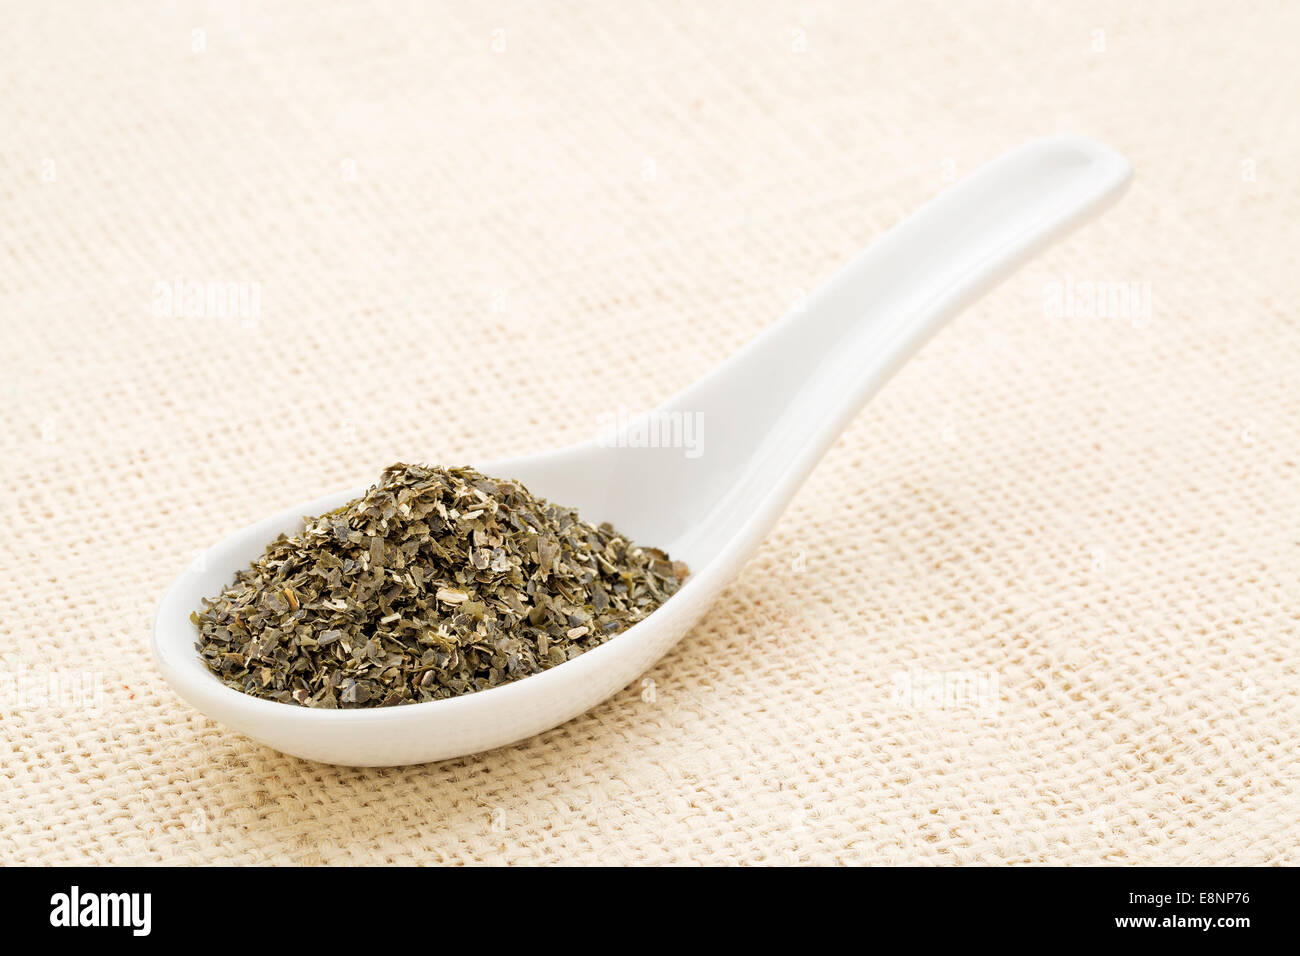 wakame seaweed on a white Chinese spoon against burlap canvas Stock Photo